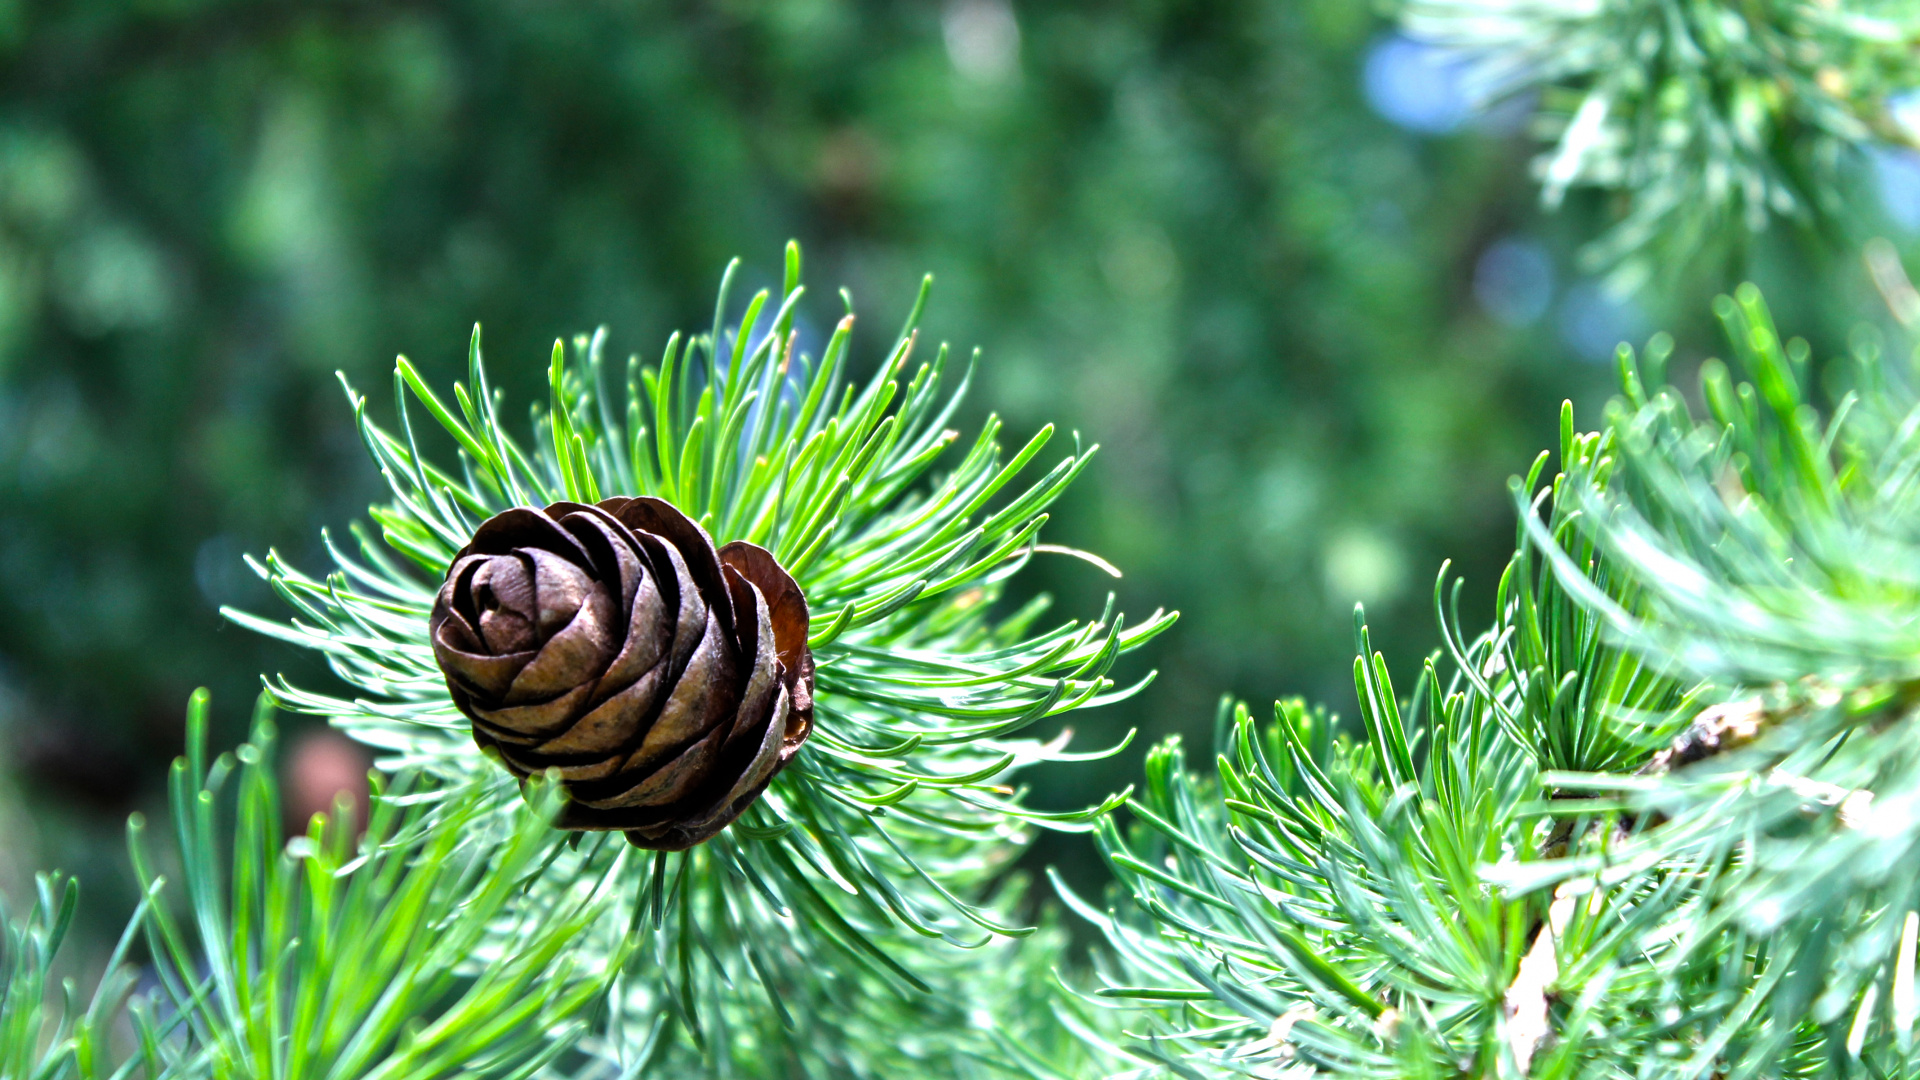 Brown Snail on Green Plant. Wallpaper in 1920x1080 Resolution